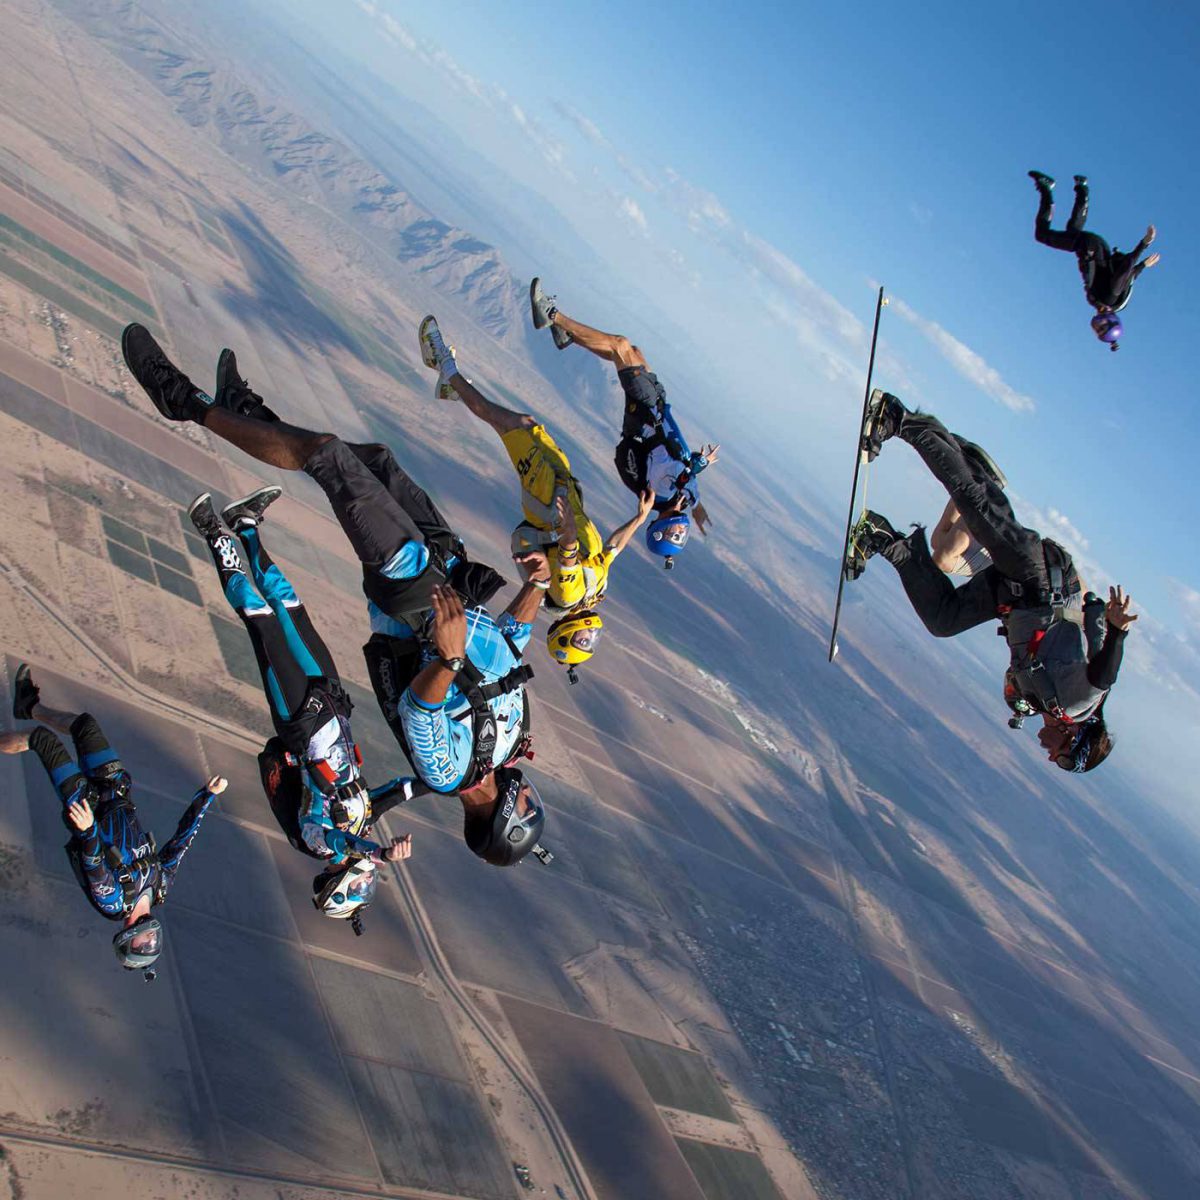 Group of experienced skydivers in free fall.